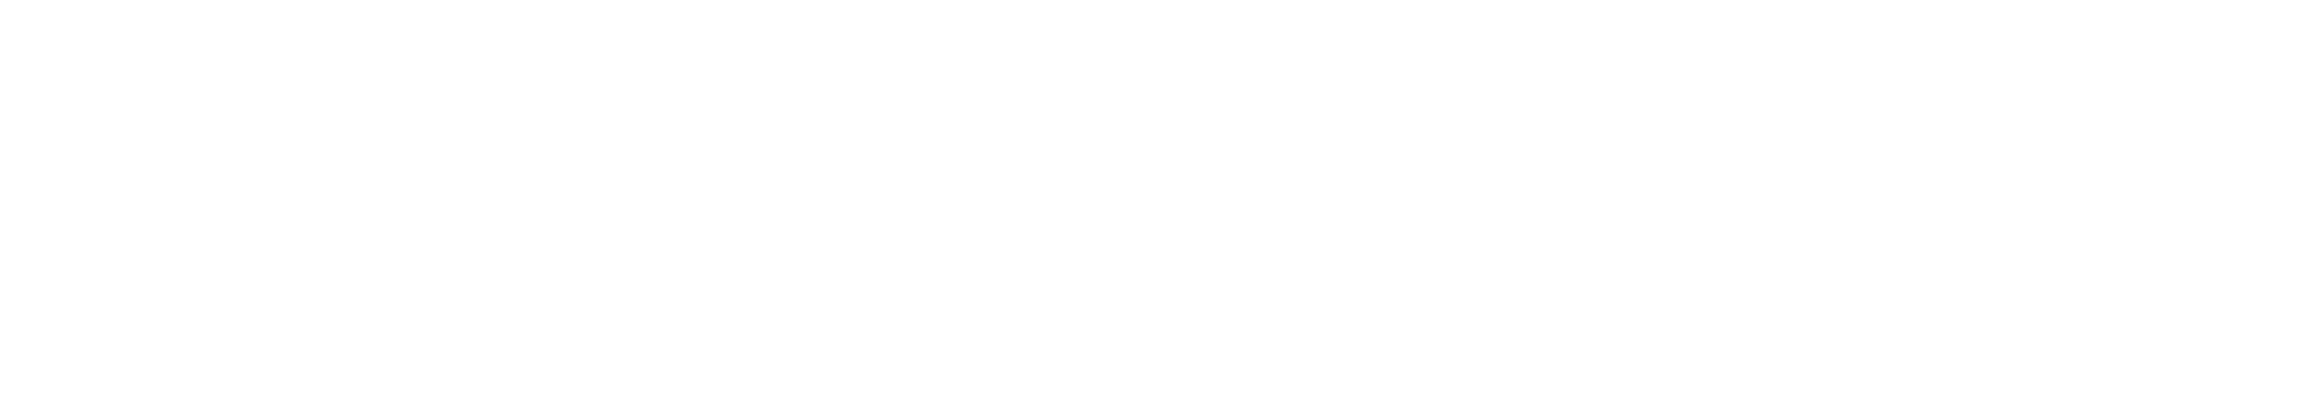 Harbor Group Management logo for Applewood Apartments